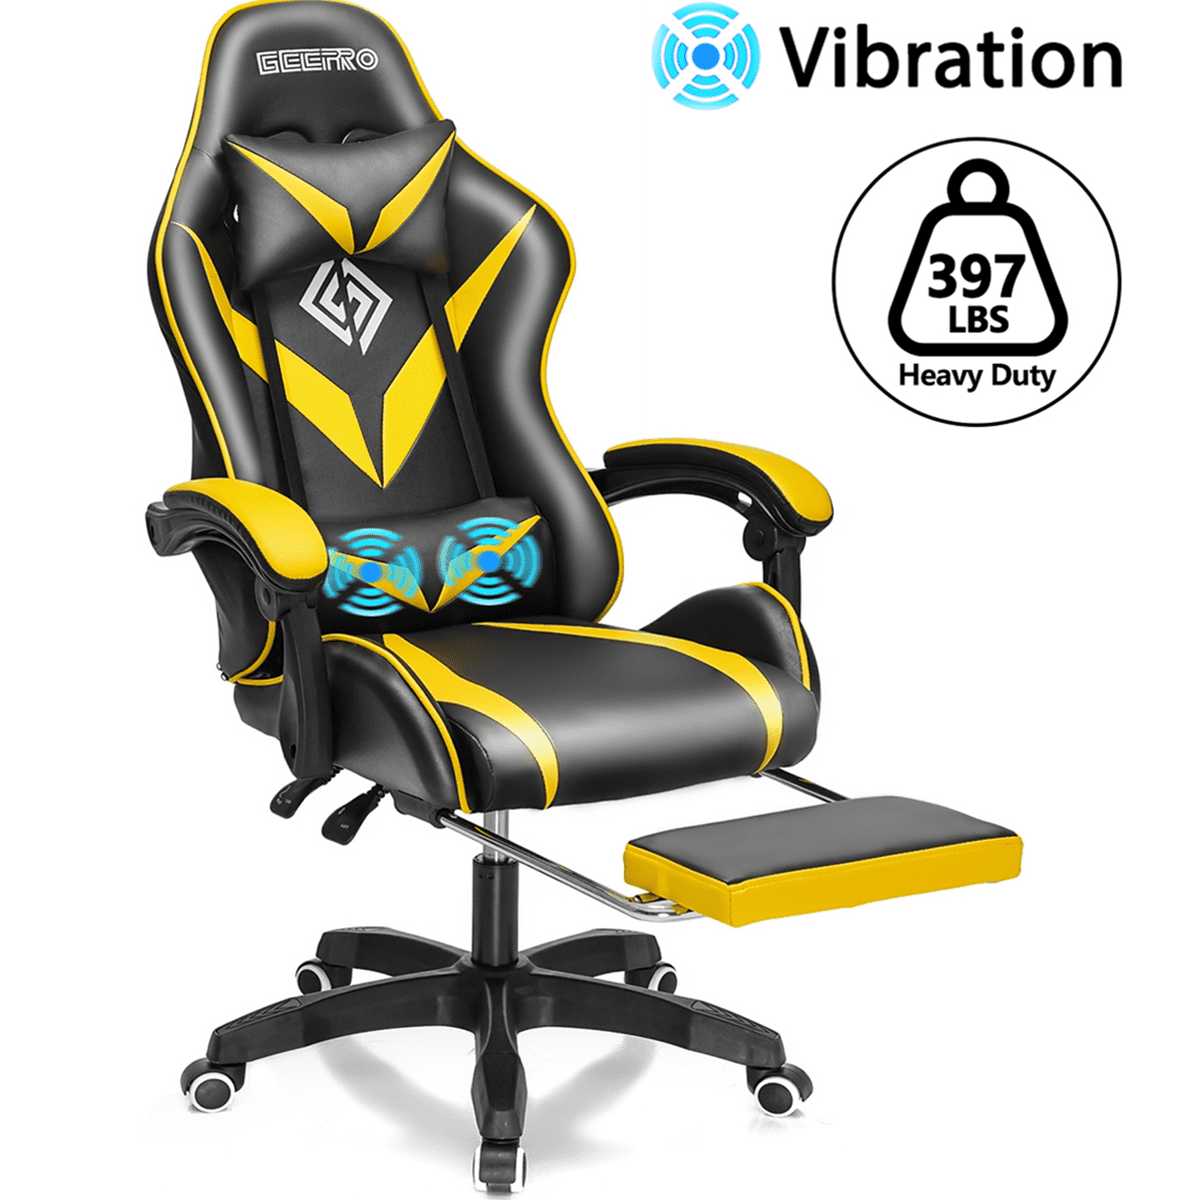 Ferghana Video Gaming Chair,PC Gaming Chair,E-Sports Chair,Massage Racing Chair with Upgrade Material,Thicker Footrest,Massage Pillow Yellow 